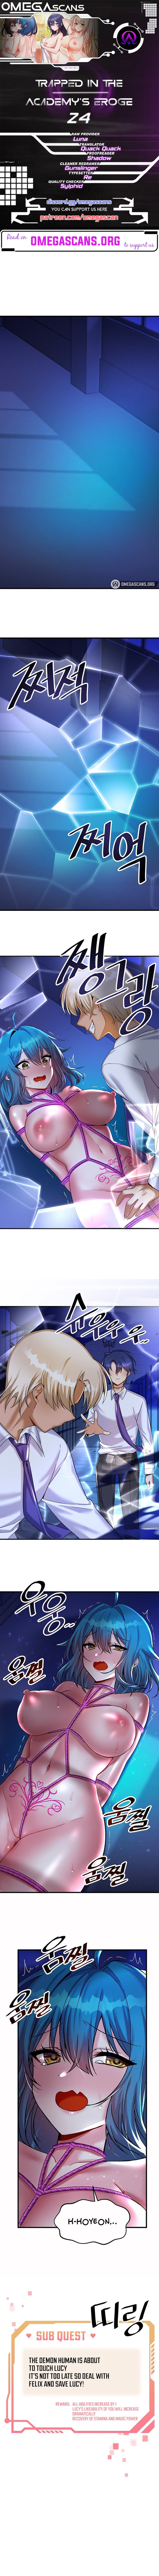 trapped-in-the-academys-eroge-chap-24-0